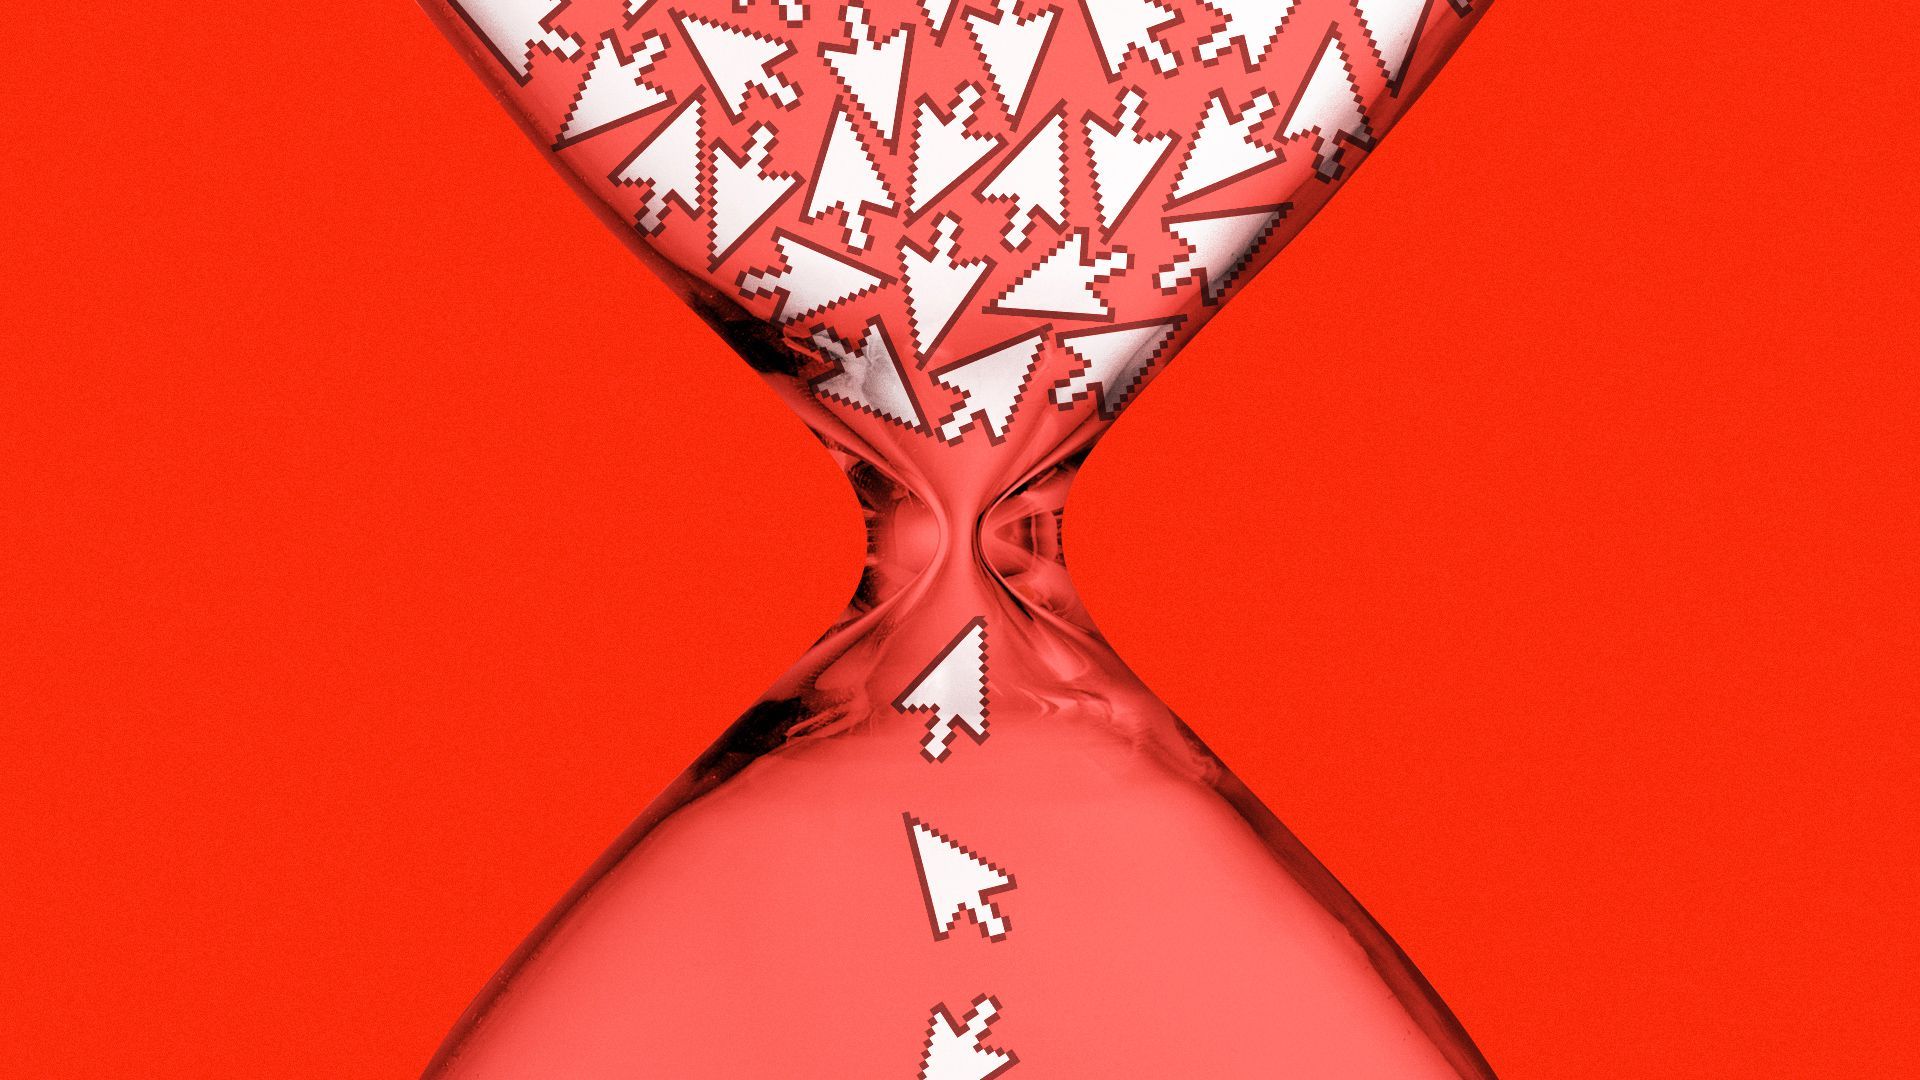 Illustration of an hourglass with cursors as the sand falling through. 